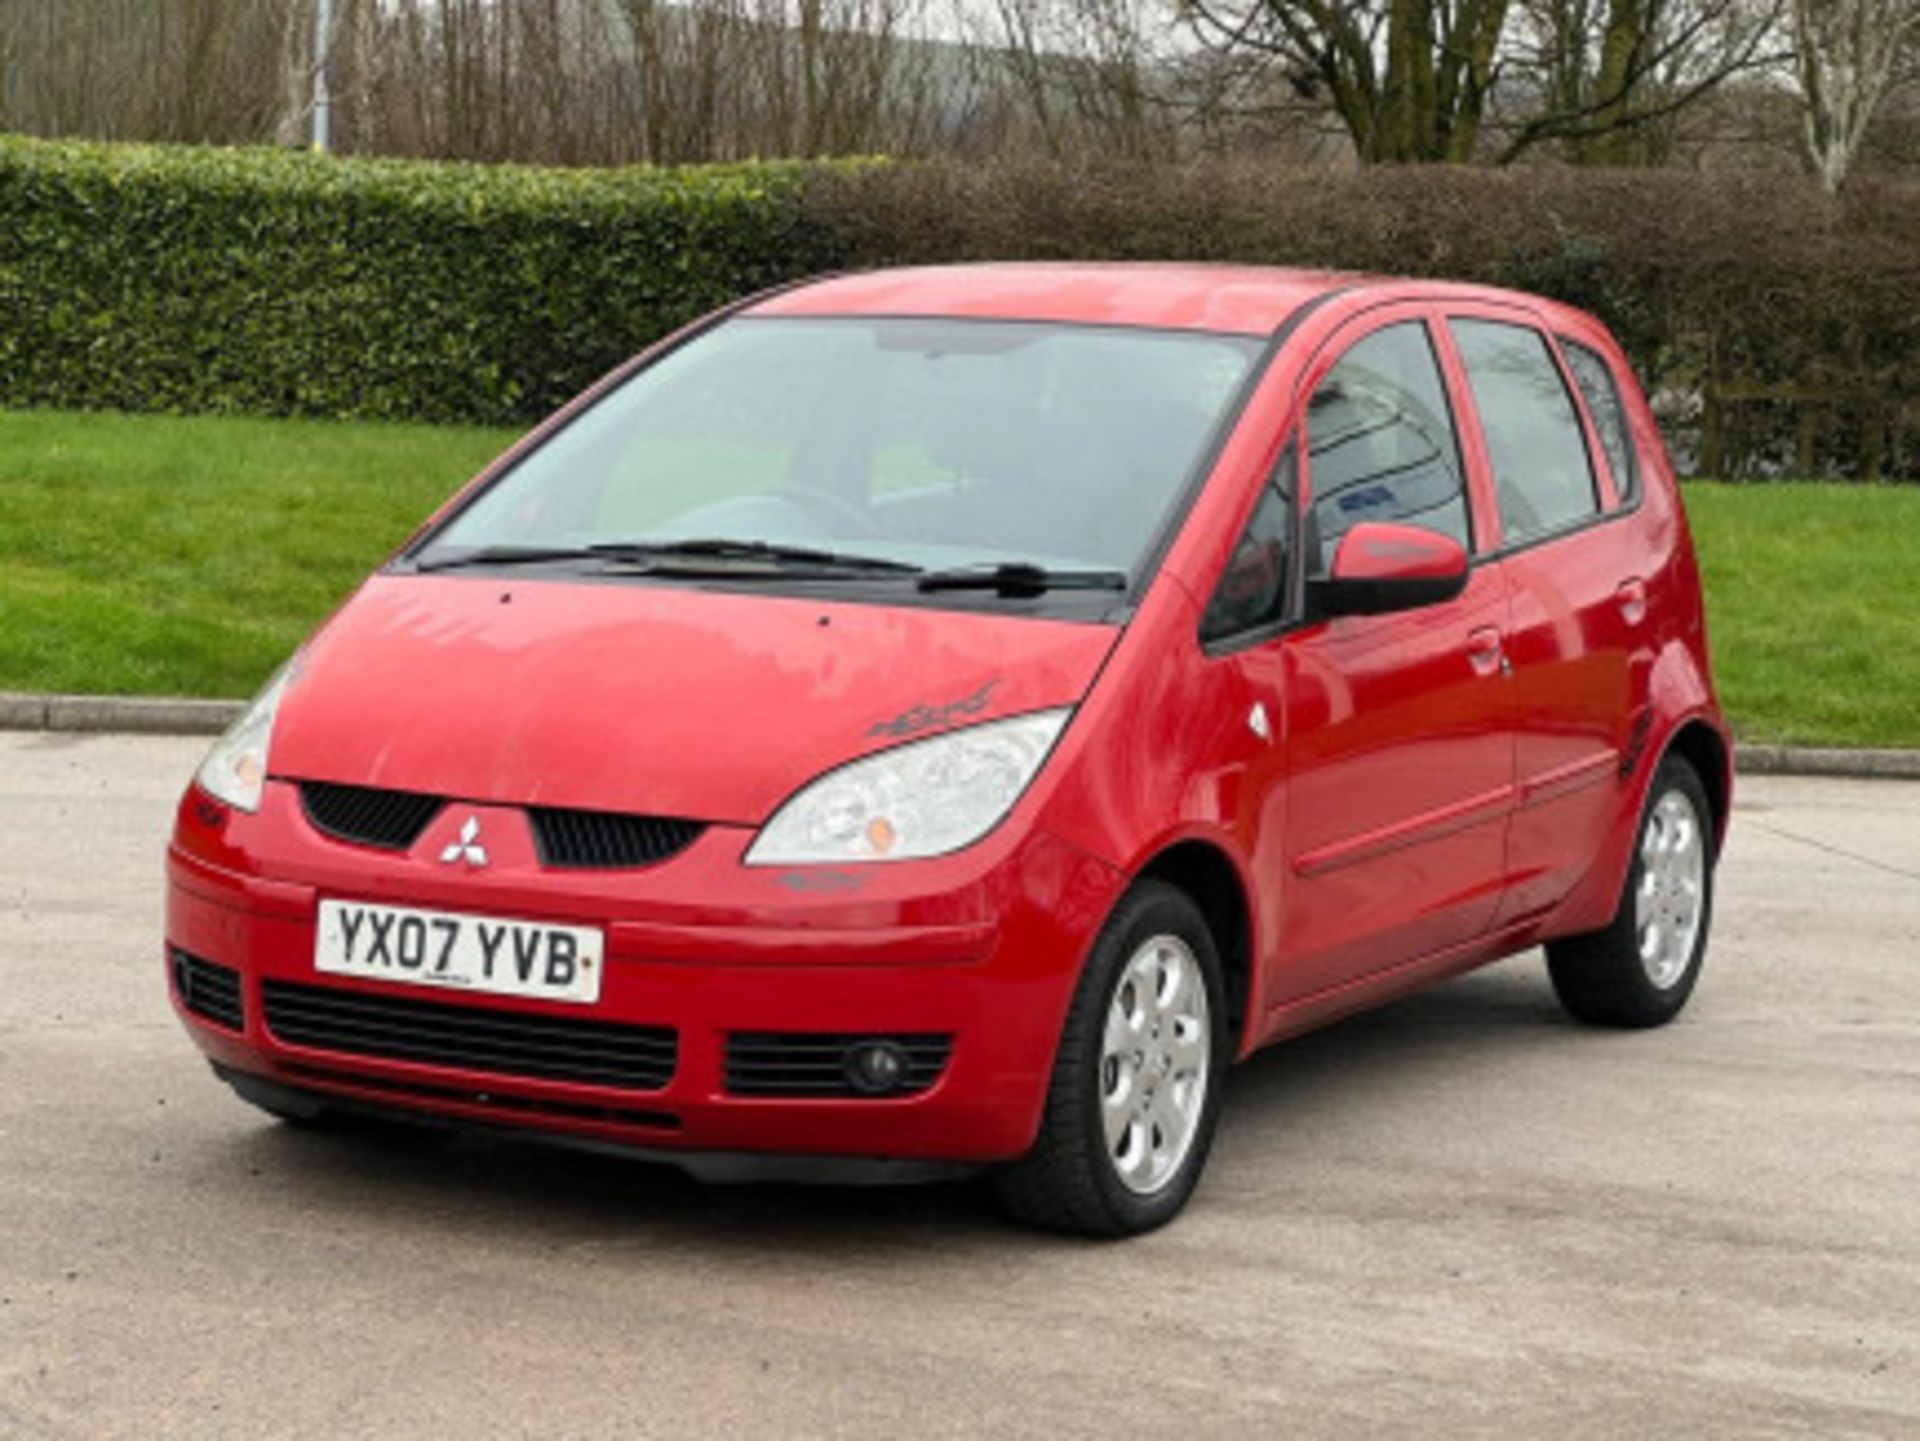 2007 MITSUBISHI COLT 1.5 DI-D DIESEL AUTOMATIC >>--NO VAT ON HAMMER--<< - Image 56 of 127